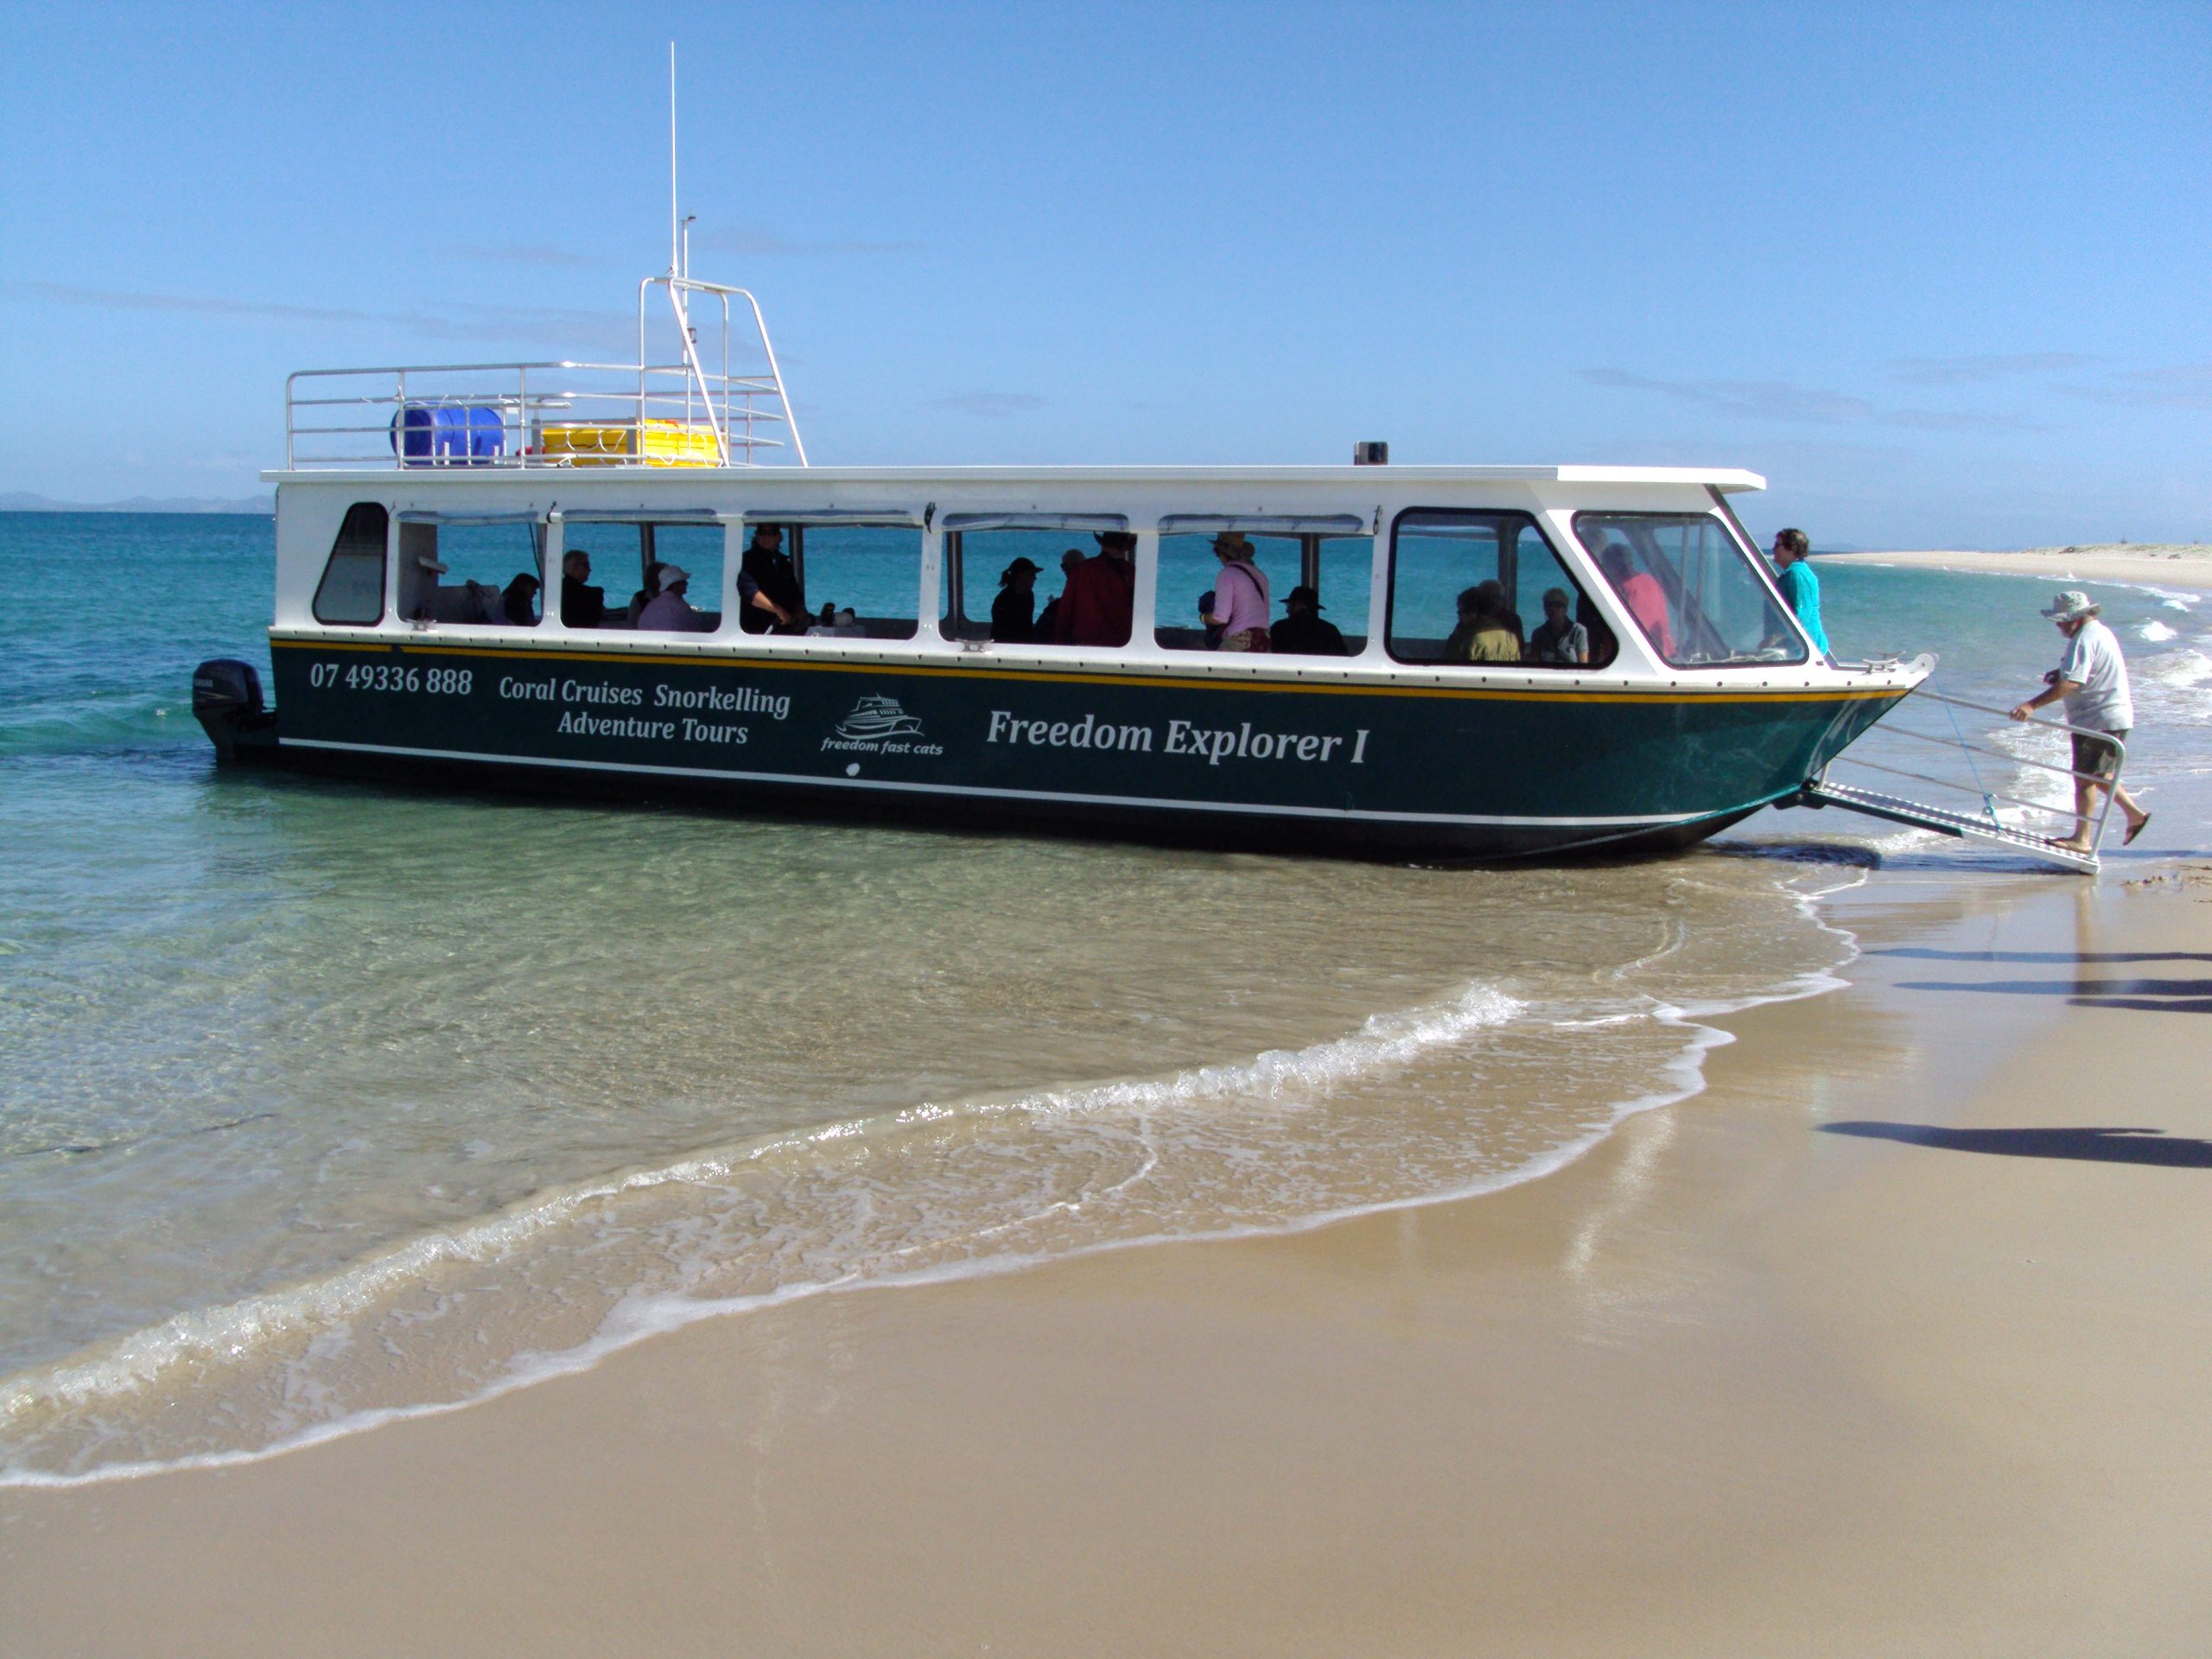 Yeppoon. Great Keppel Island glass bottom coral viewing boat